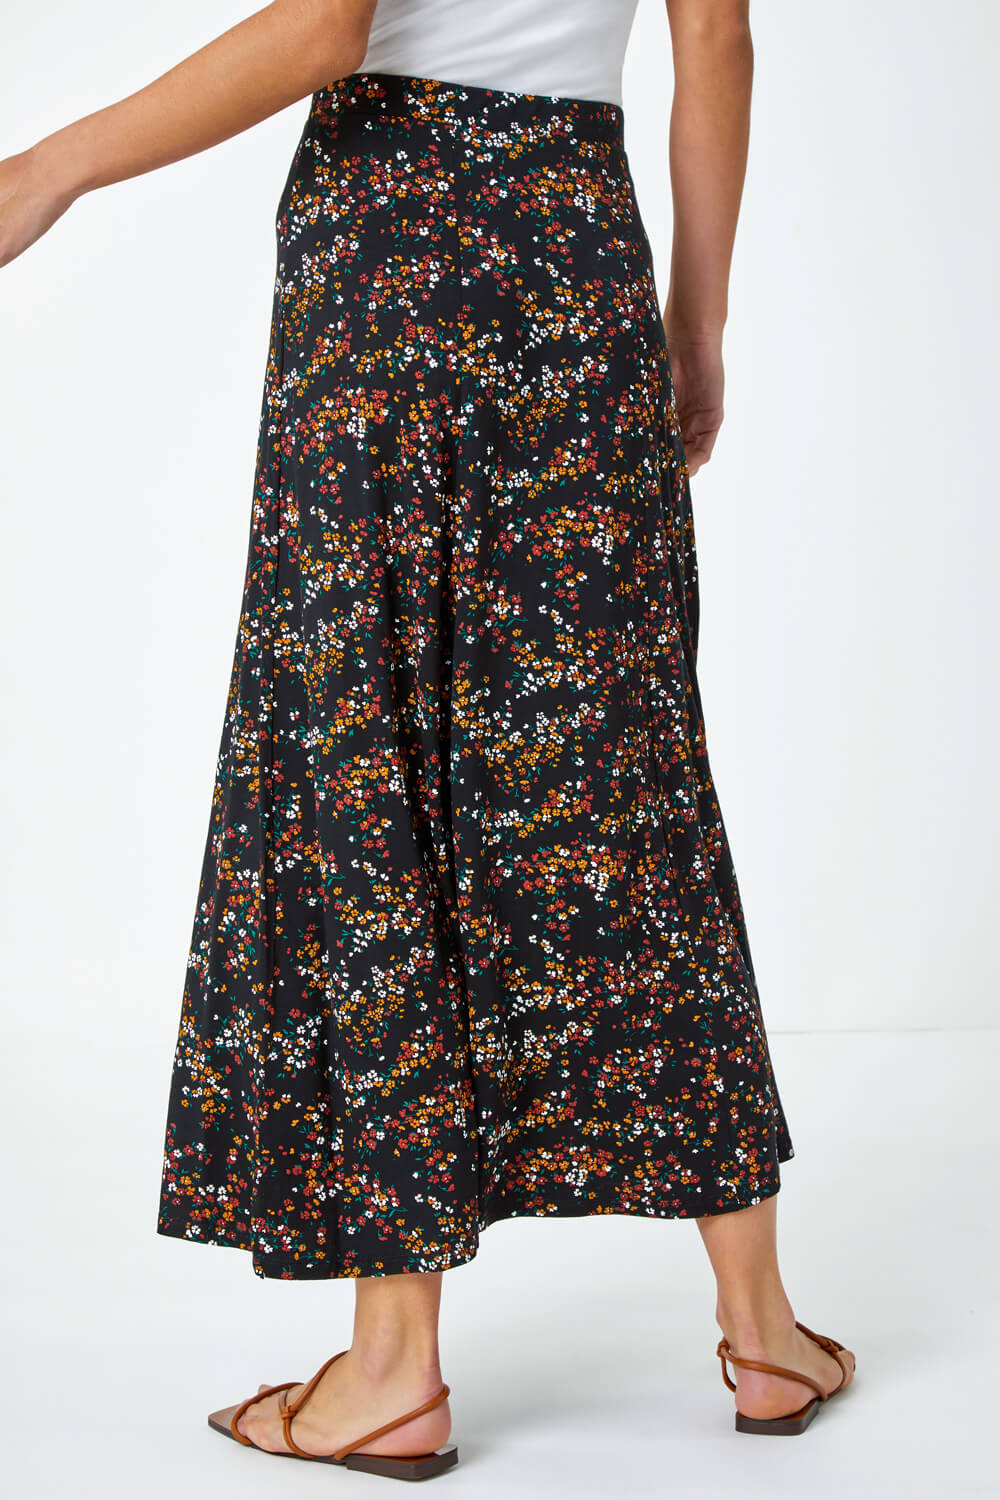 Black Ditsy Floral Jersey Skirt, Image 3 of 5